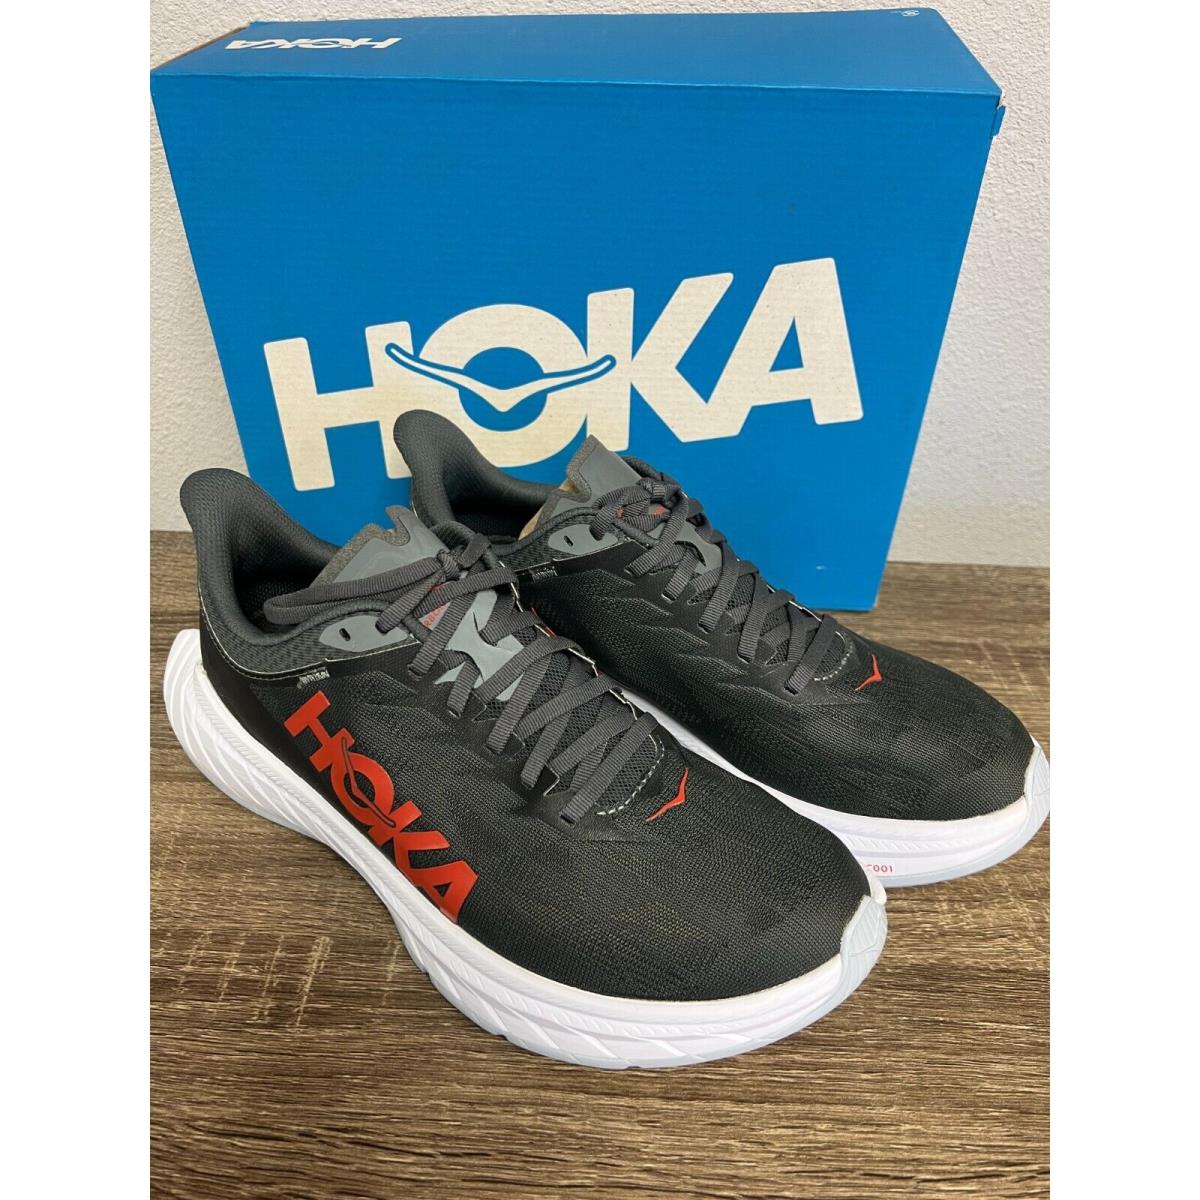 Mens Hoka One One Running Shoes Dsfs - Black Grey Red 1113526